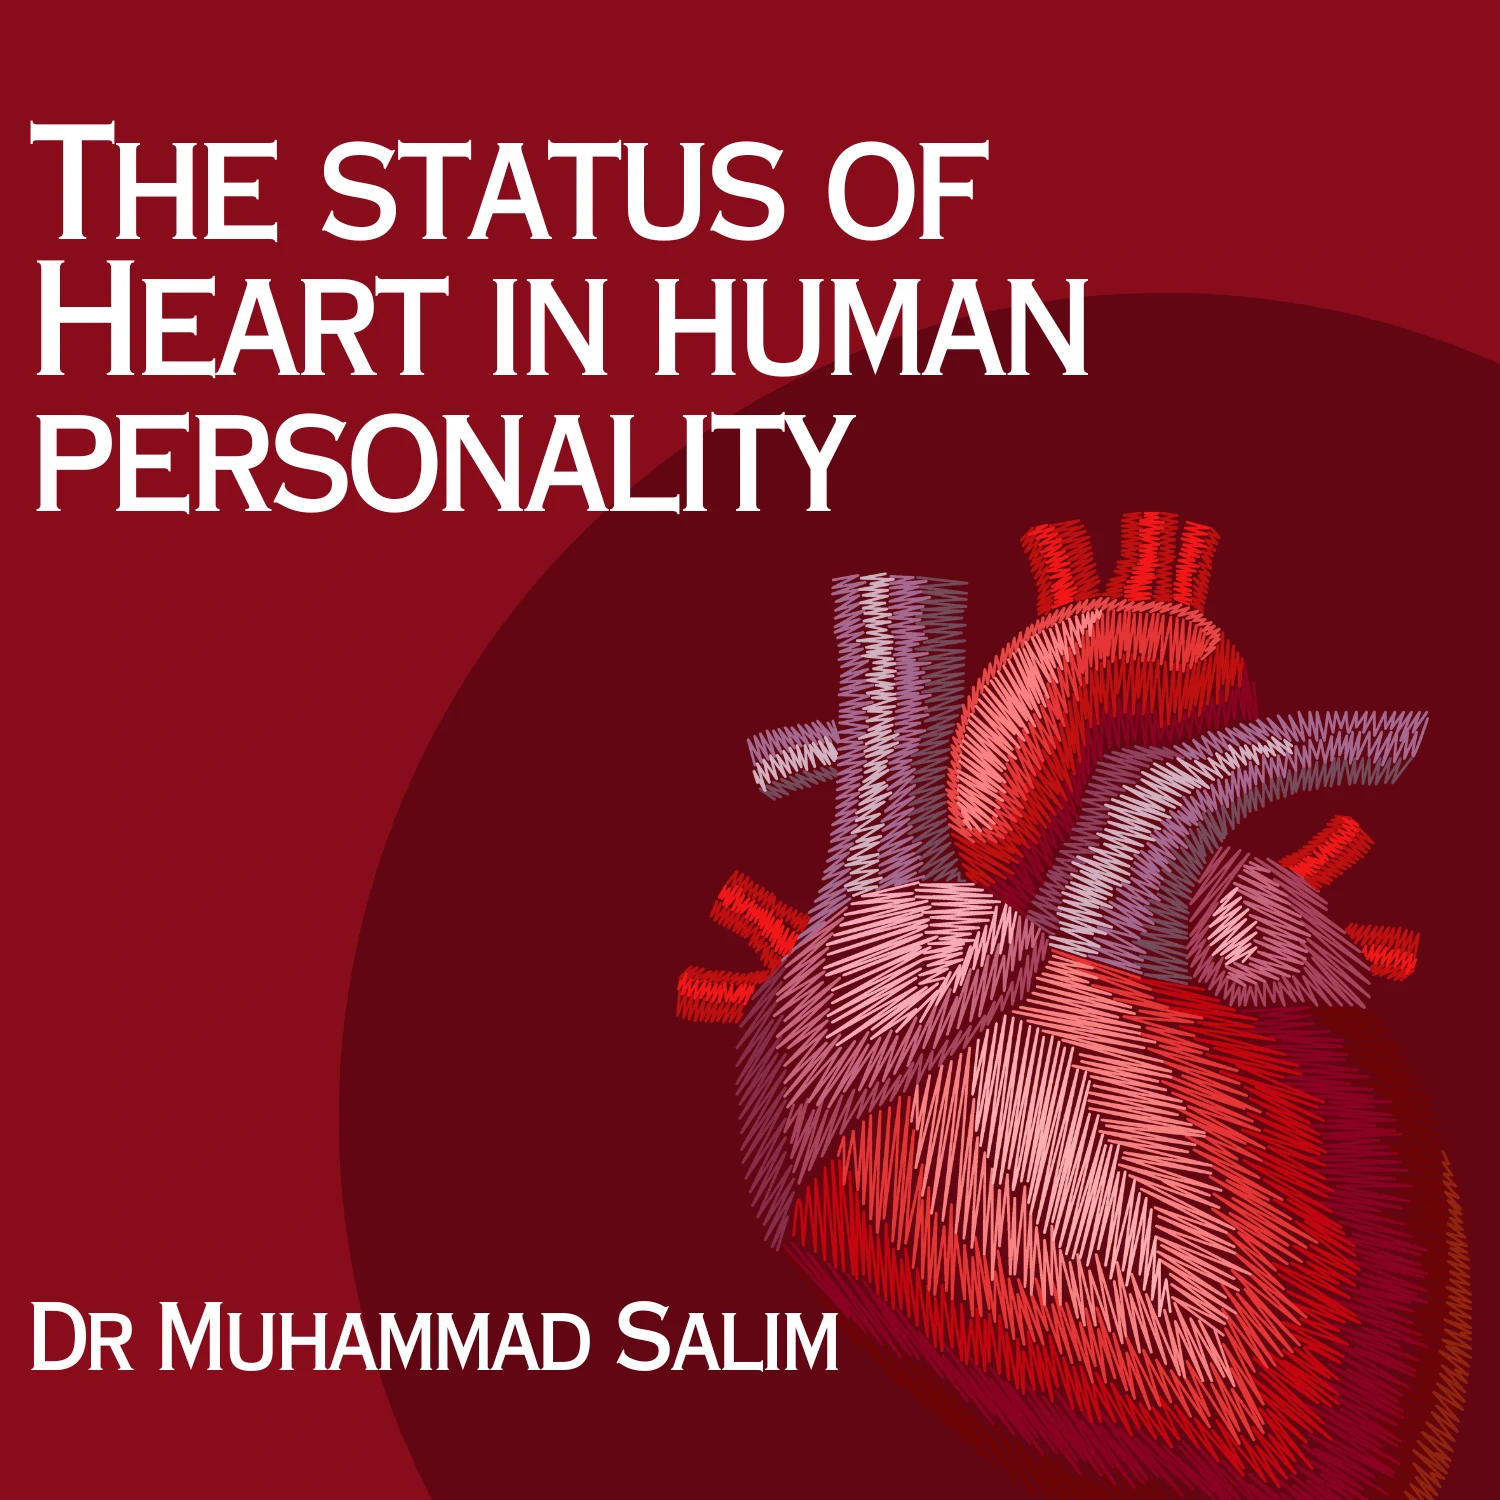 The Status of heart in Human Personality